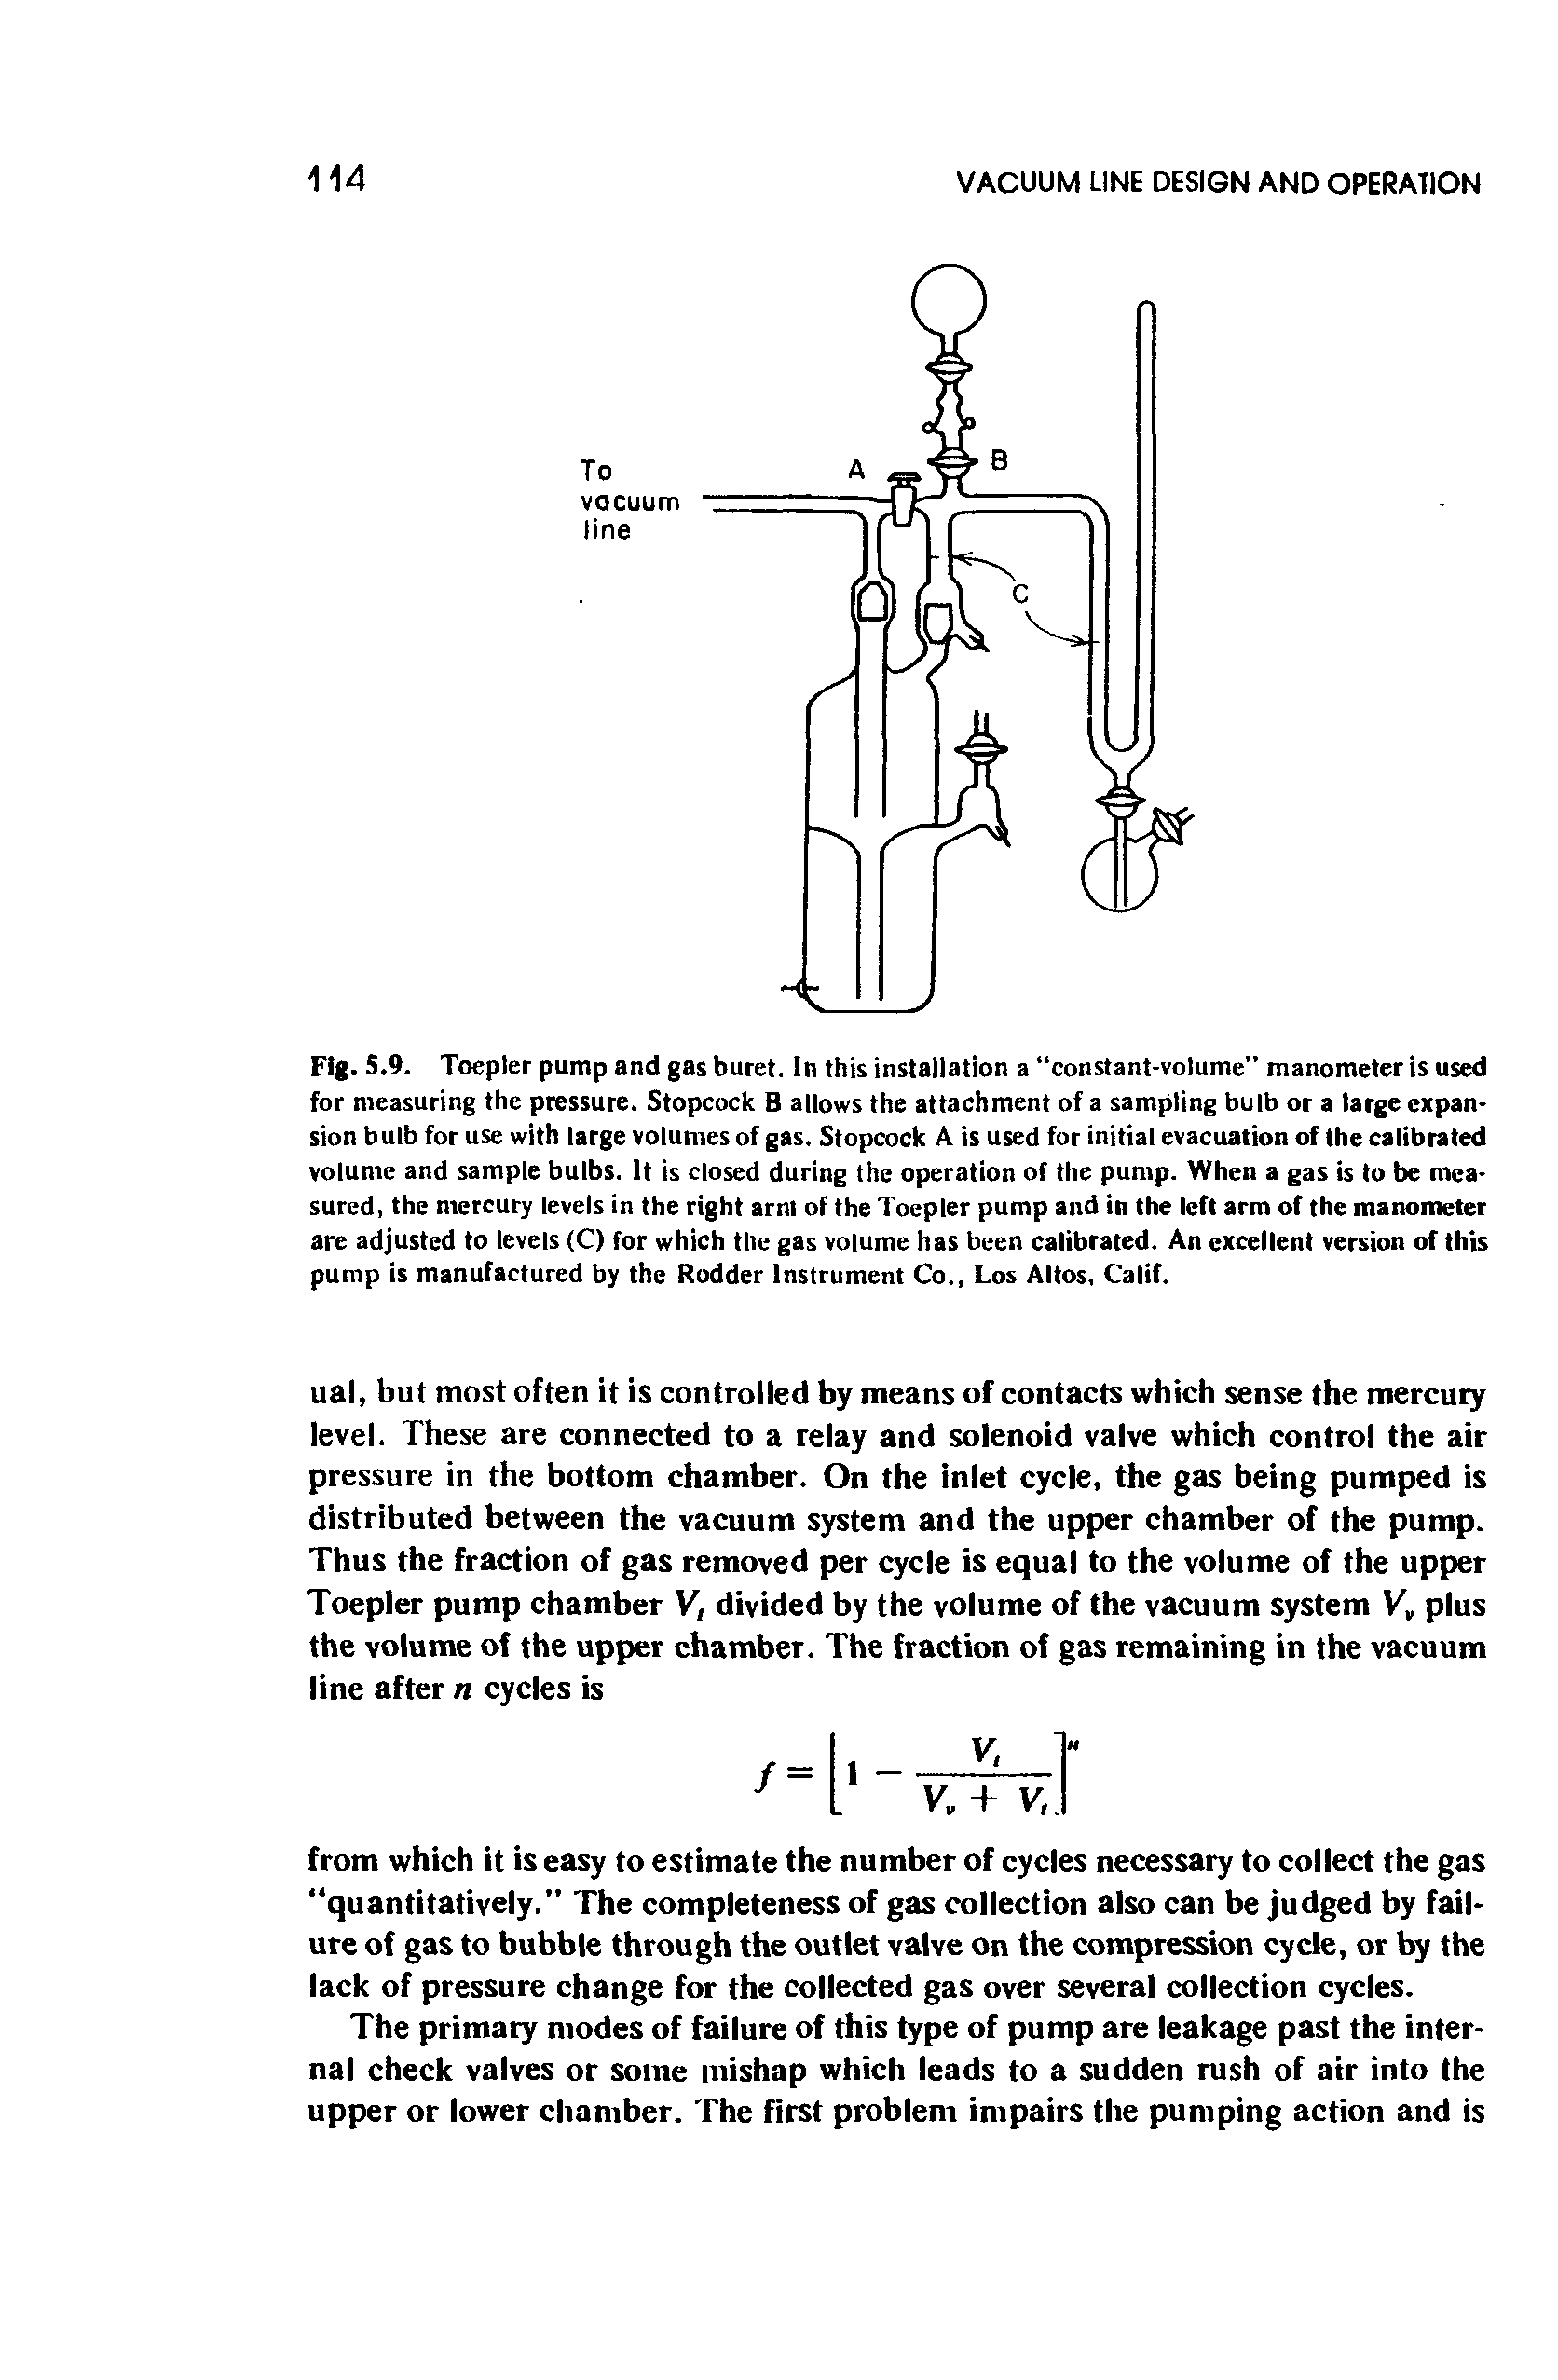 Fig. 5.9. Toepler pump and gas buret. In this installation a constant-volume" manometer is used for measuring the pressure. Stopcock B allows the attachment of a sampling bulb or a large expansion bulb for use with large volumes of gas. Stopcock A is used for initial evacuation of the calibrated volume and sample bulbs. It is closed during the operation of the pump. When a gas is to be measured, the mercury levels in the right arm of the Toepler pump and in the left arm of the manometer are adjusted to levels (C) for which the gas volume has been calibrated. An excellent version of this pump is manufactured by the Rodder Instrument Co., Los Altos, Calif.